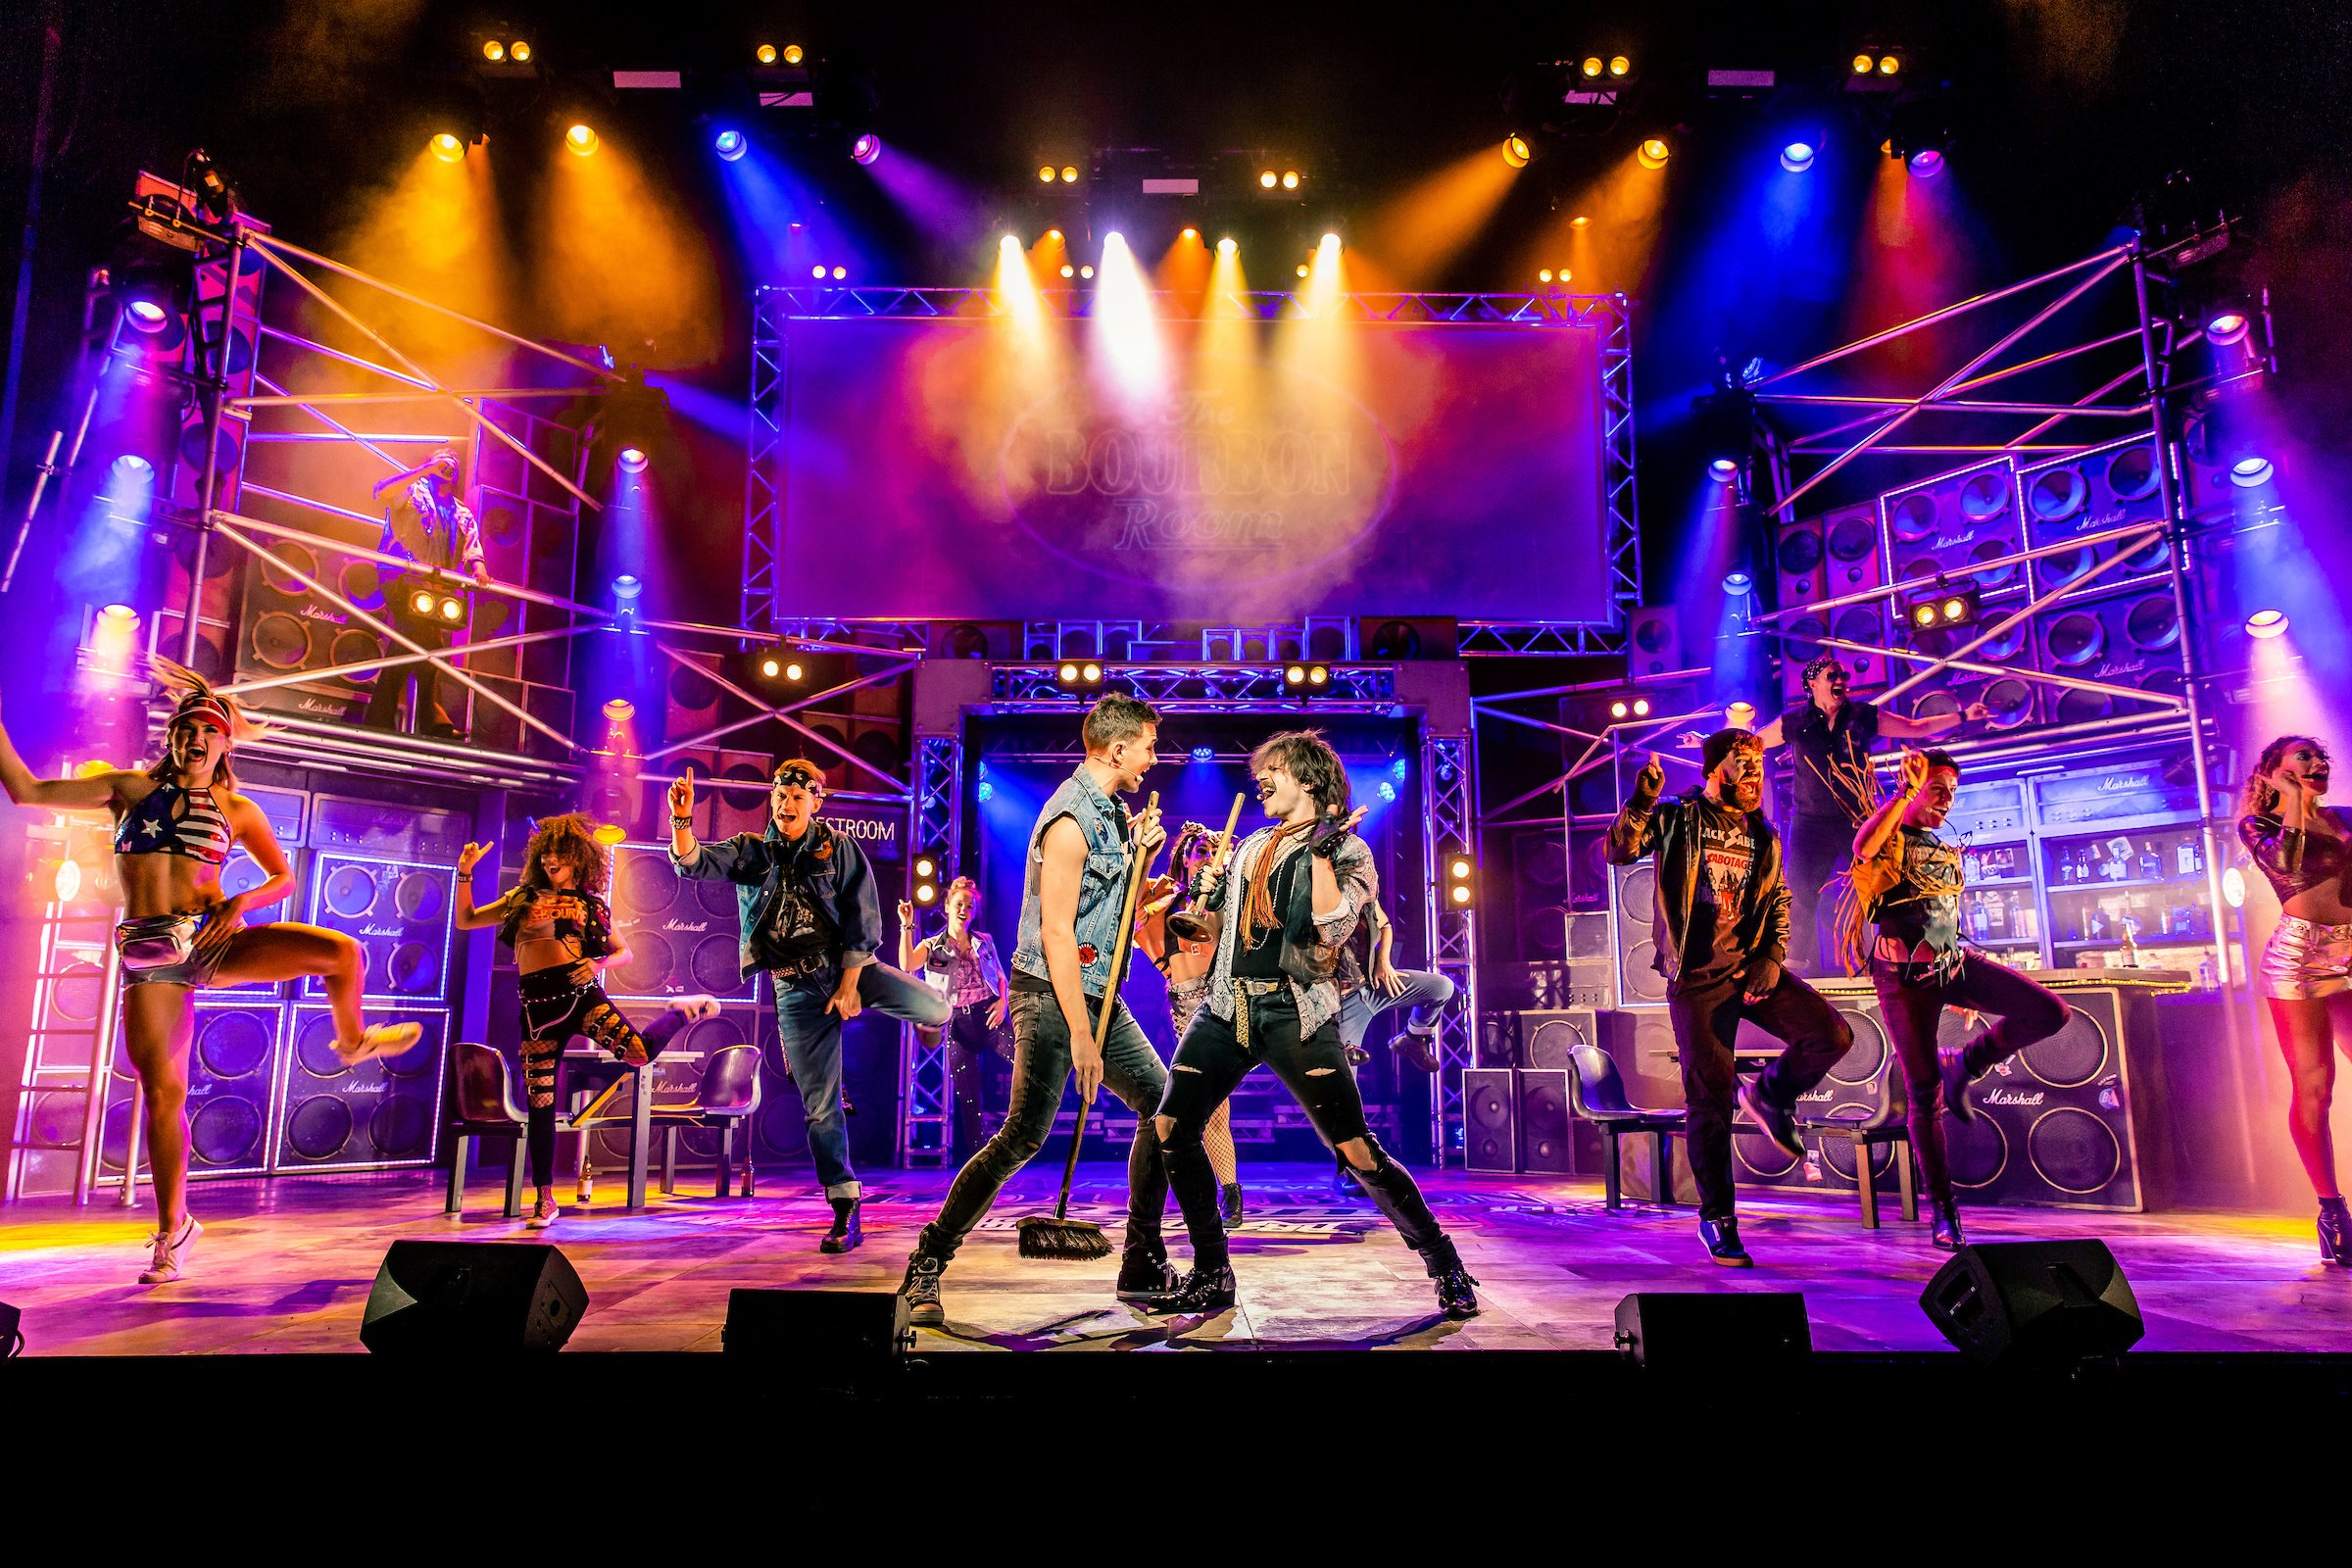 Musical comedy ‘Rock of Ages’ will hit Milton Keynes Theatre